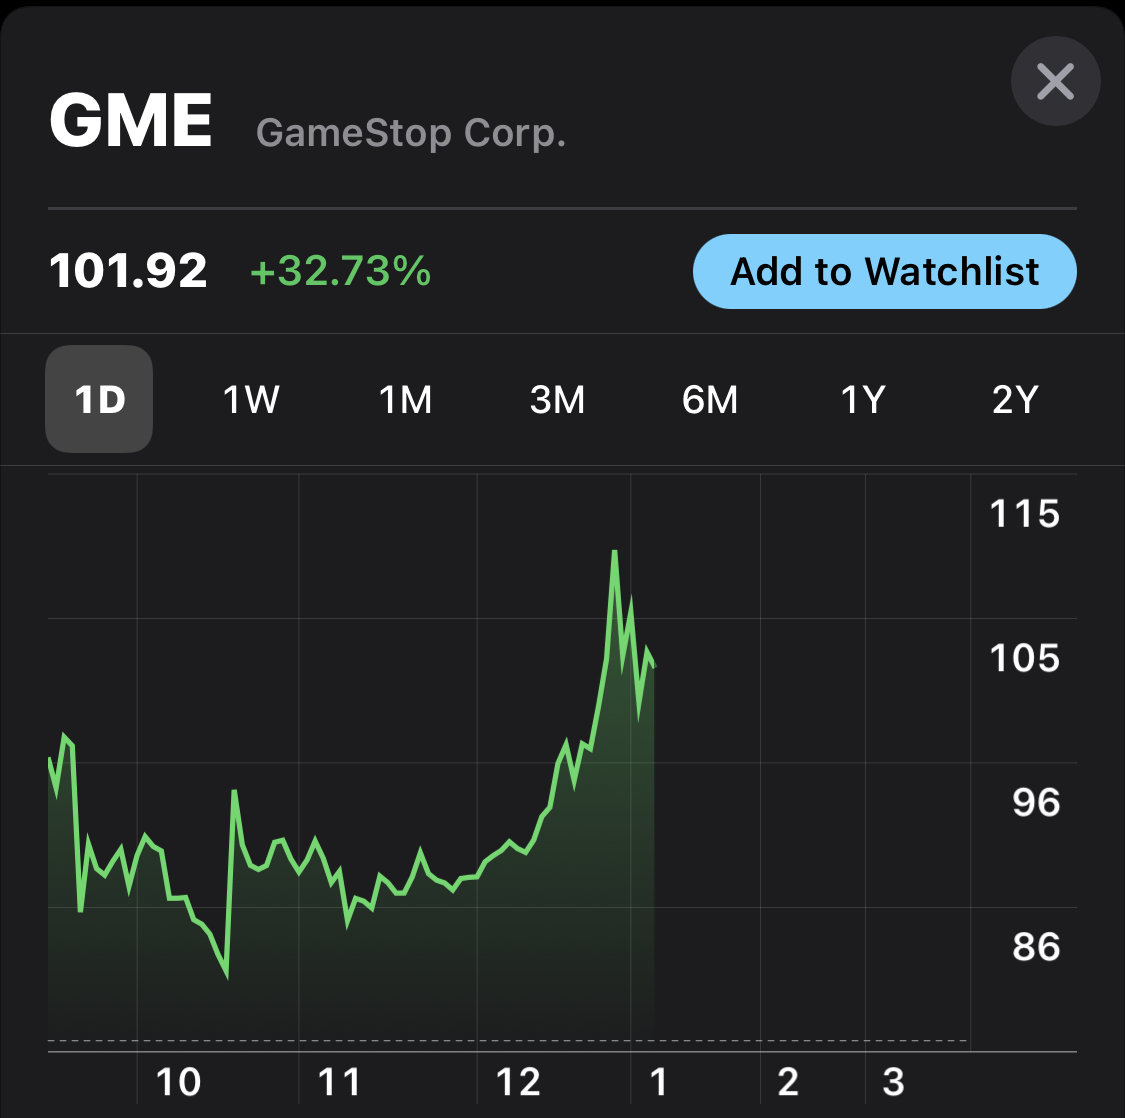 10/ GameStop's crippled one hedge fund, but ain't done yetearlier today, billionaire investor  @chamath bought $115 call options meaning he thinks the stock will keep on risingdespite his slightly tongue and cheek bullishness, the stock is skyrocketing once more today